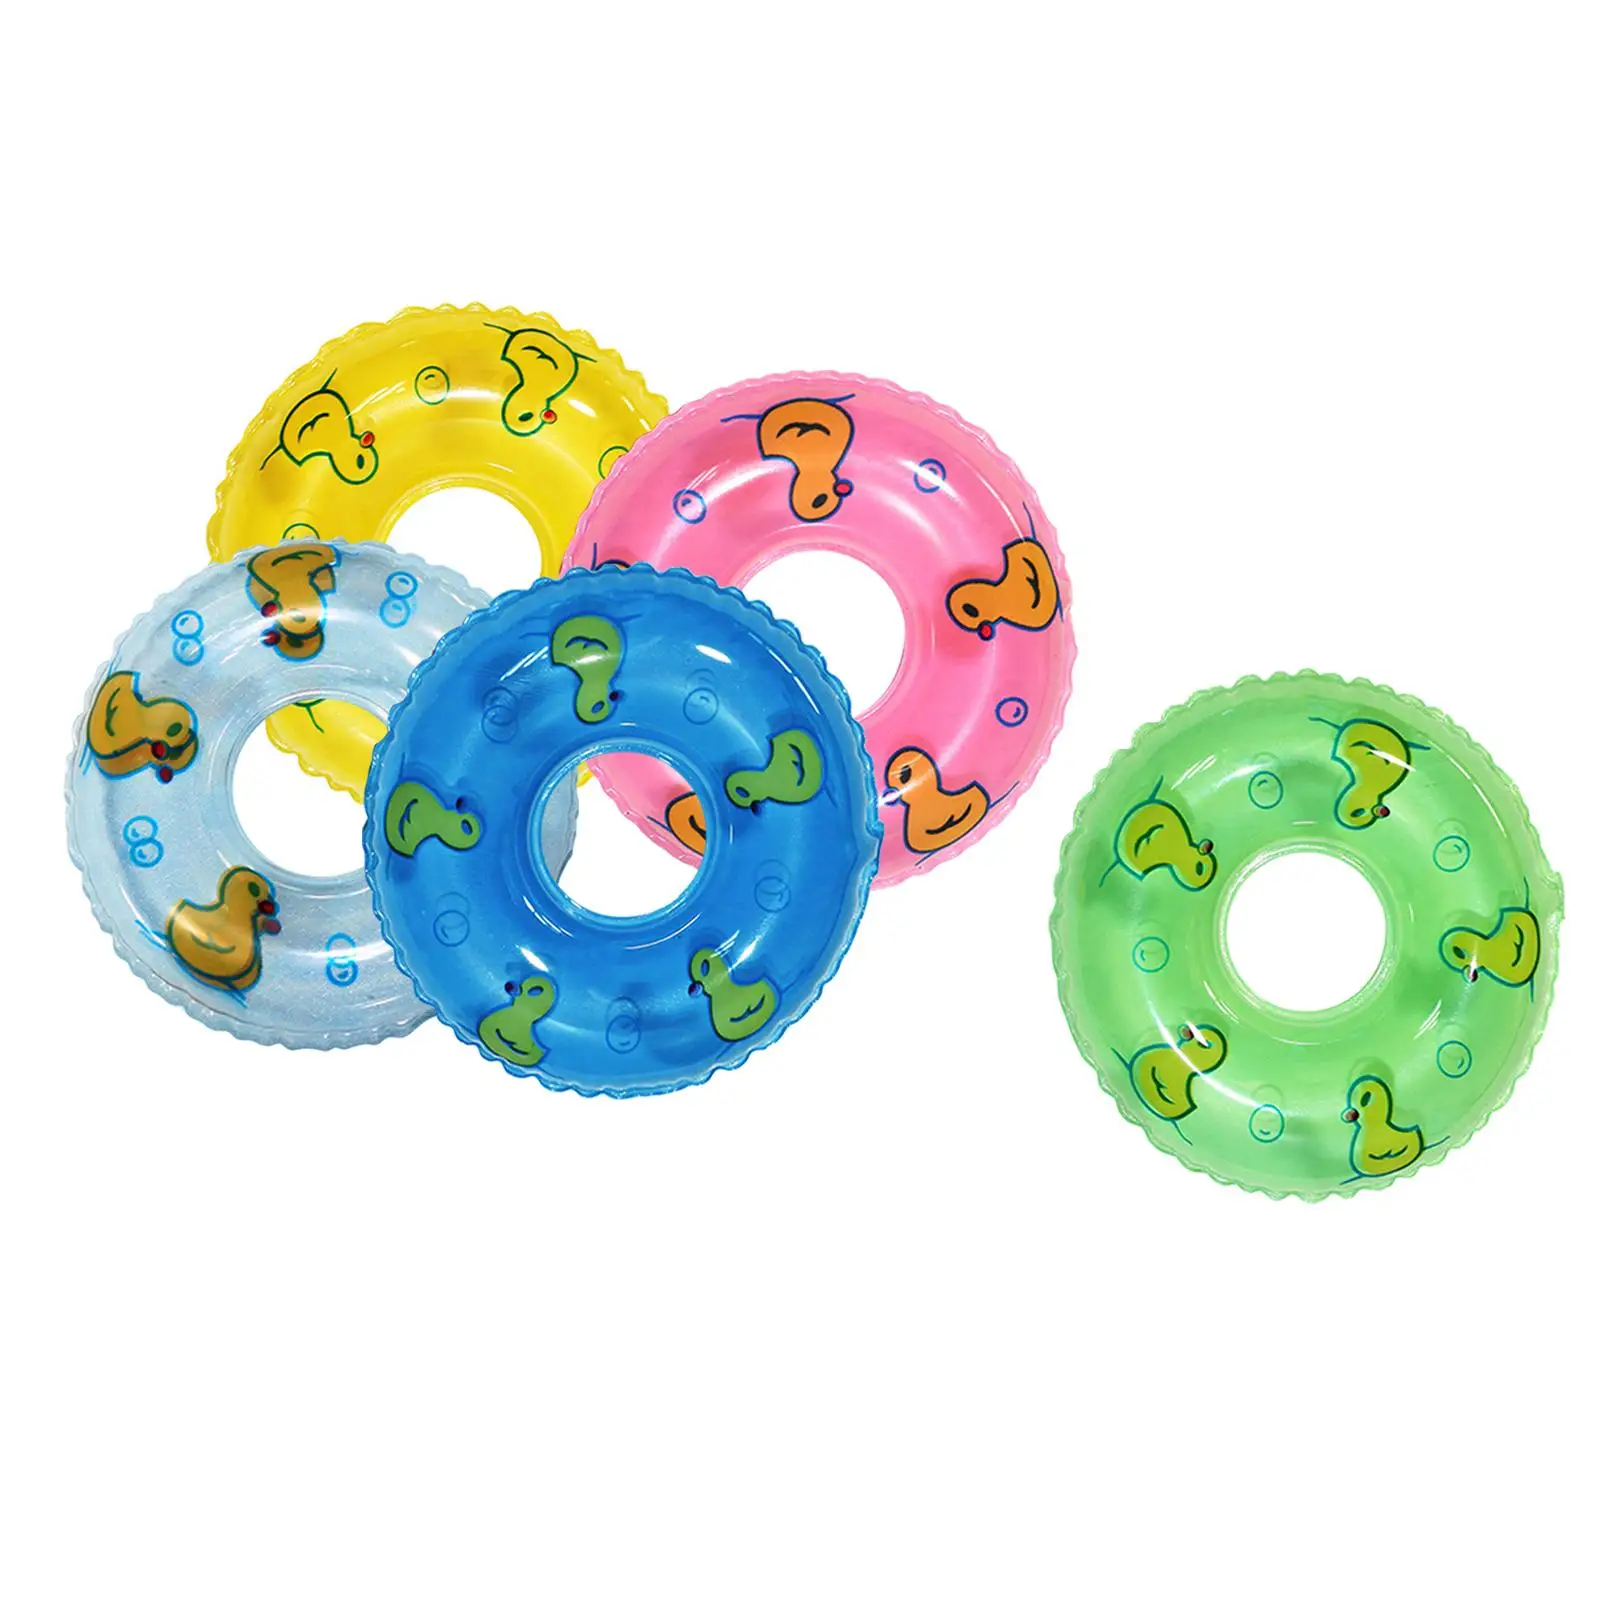 5 Pieces 1:12 Mini Floating Swimming Rings fun Scenery Supplies